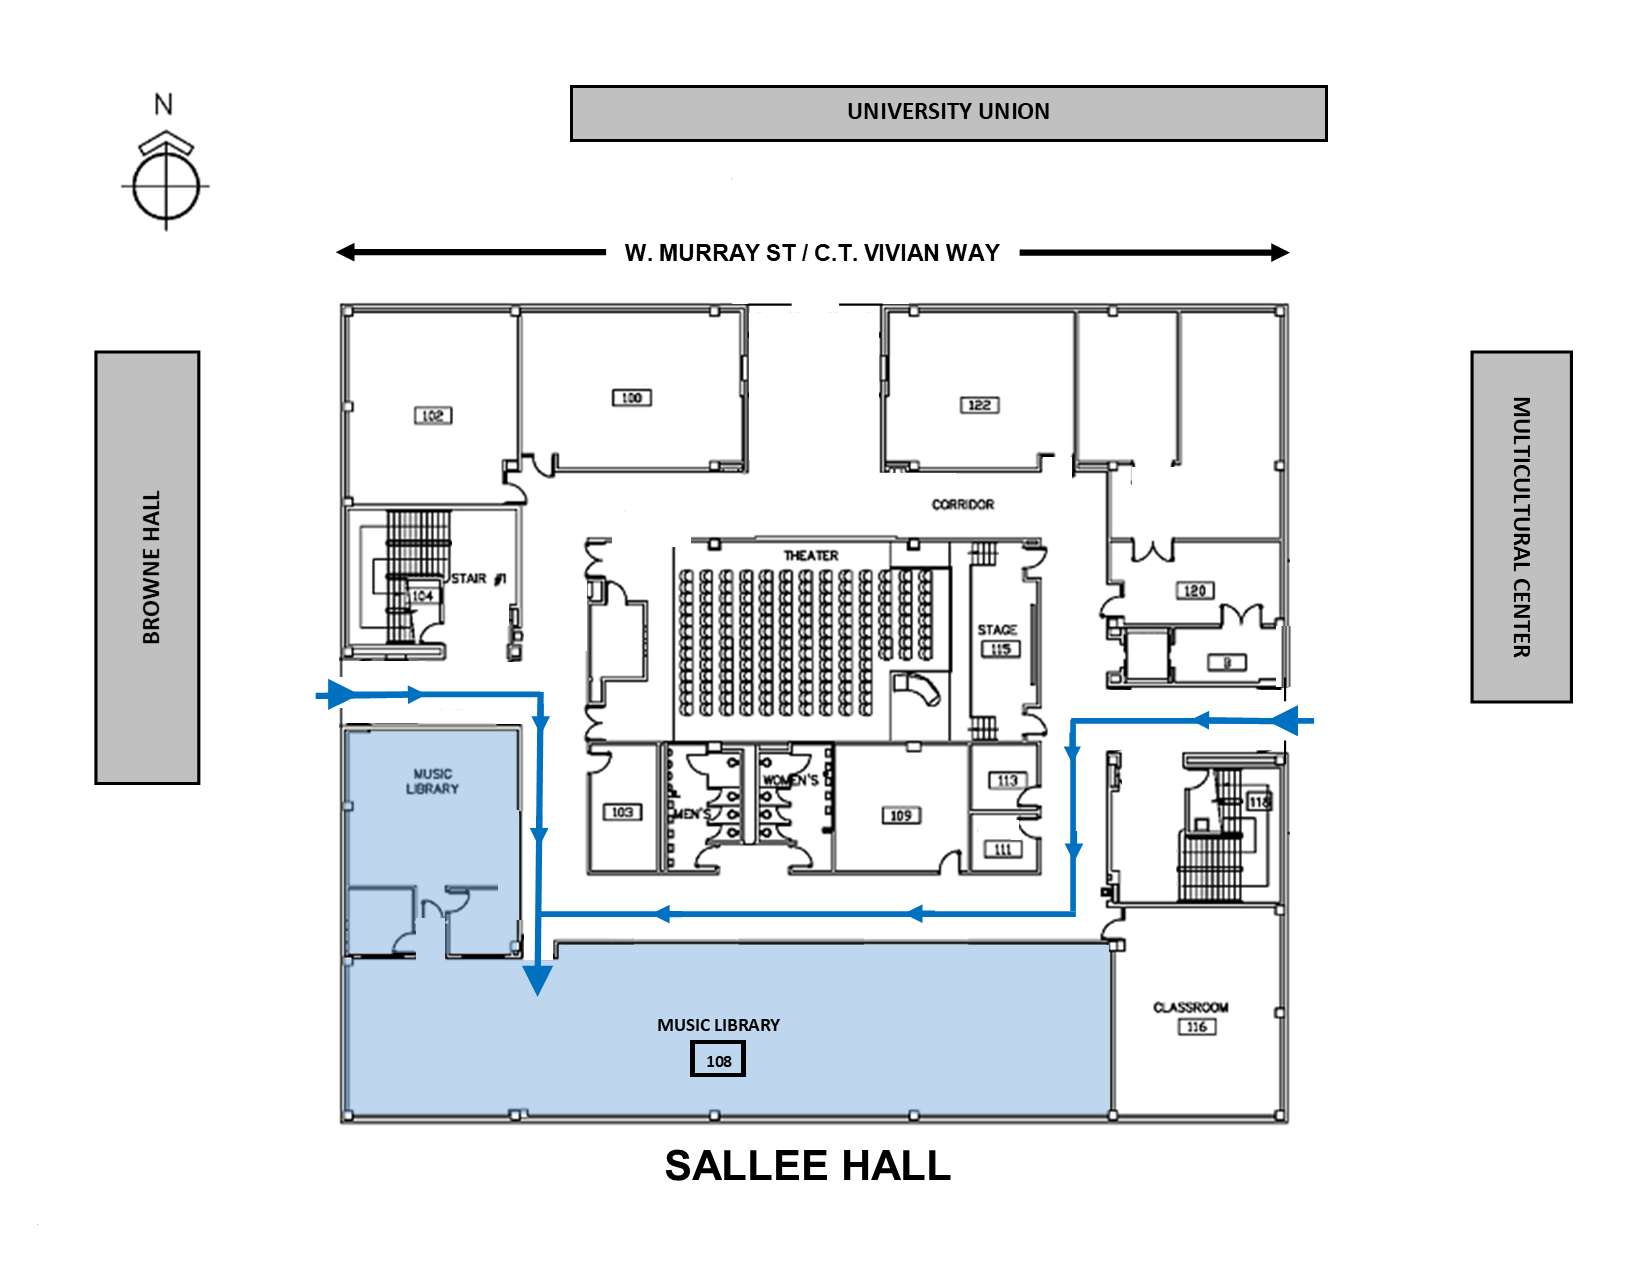 Map of Sallee Hall (Music Library in Room 108)